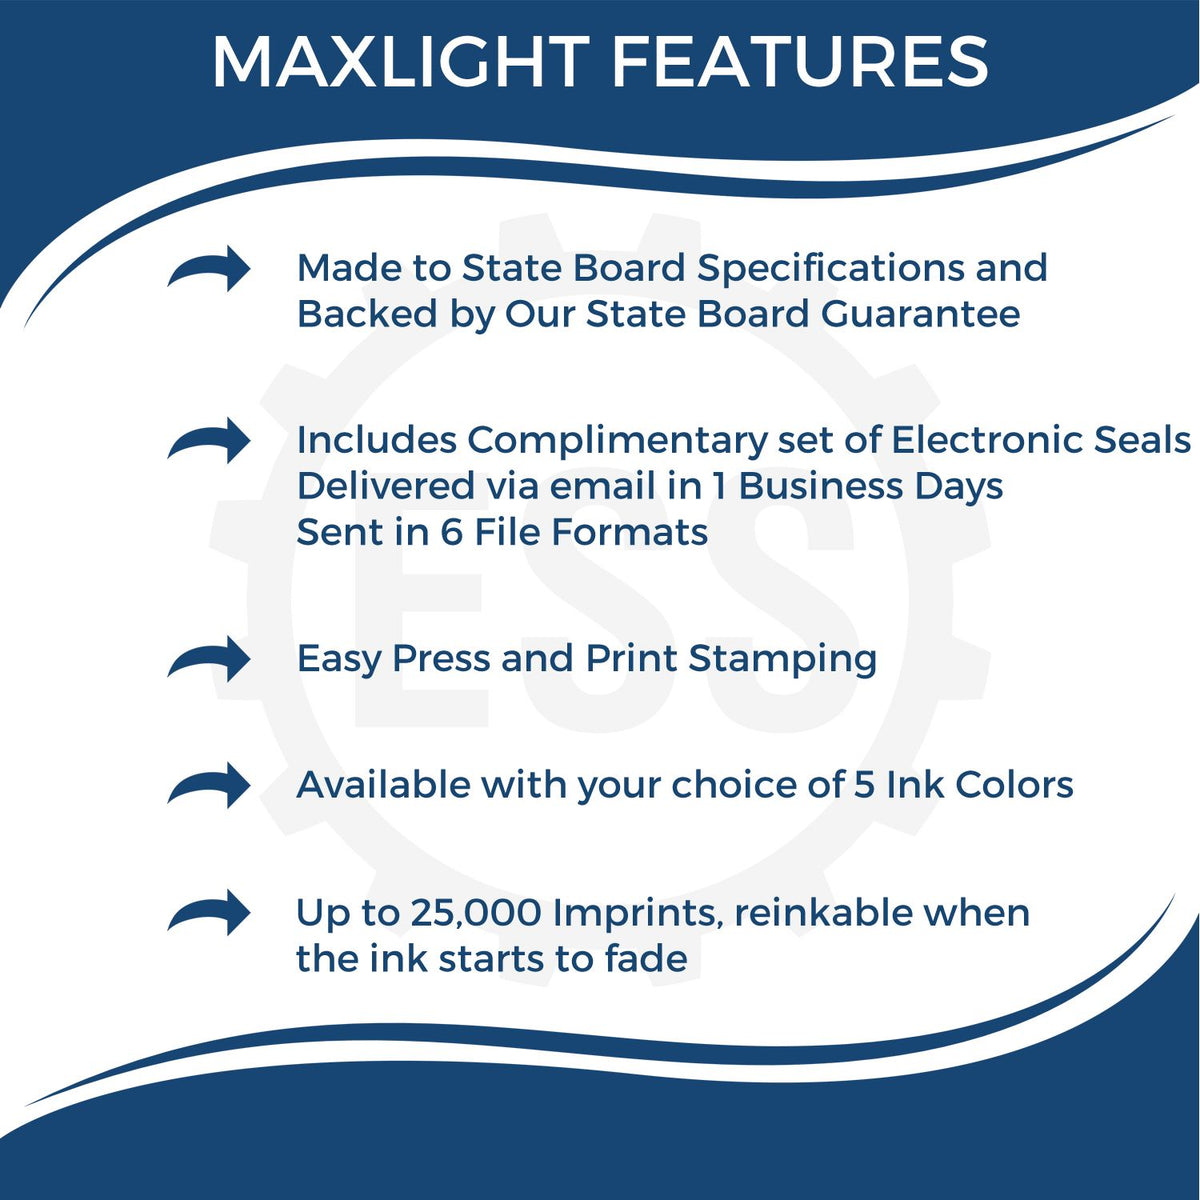 A picture of an infographic highlighting the selling points for the MaxLight Premium Pre-Inked Ohio State Seal Notarial Stamp